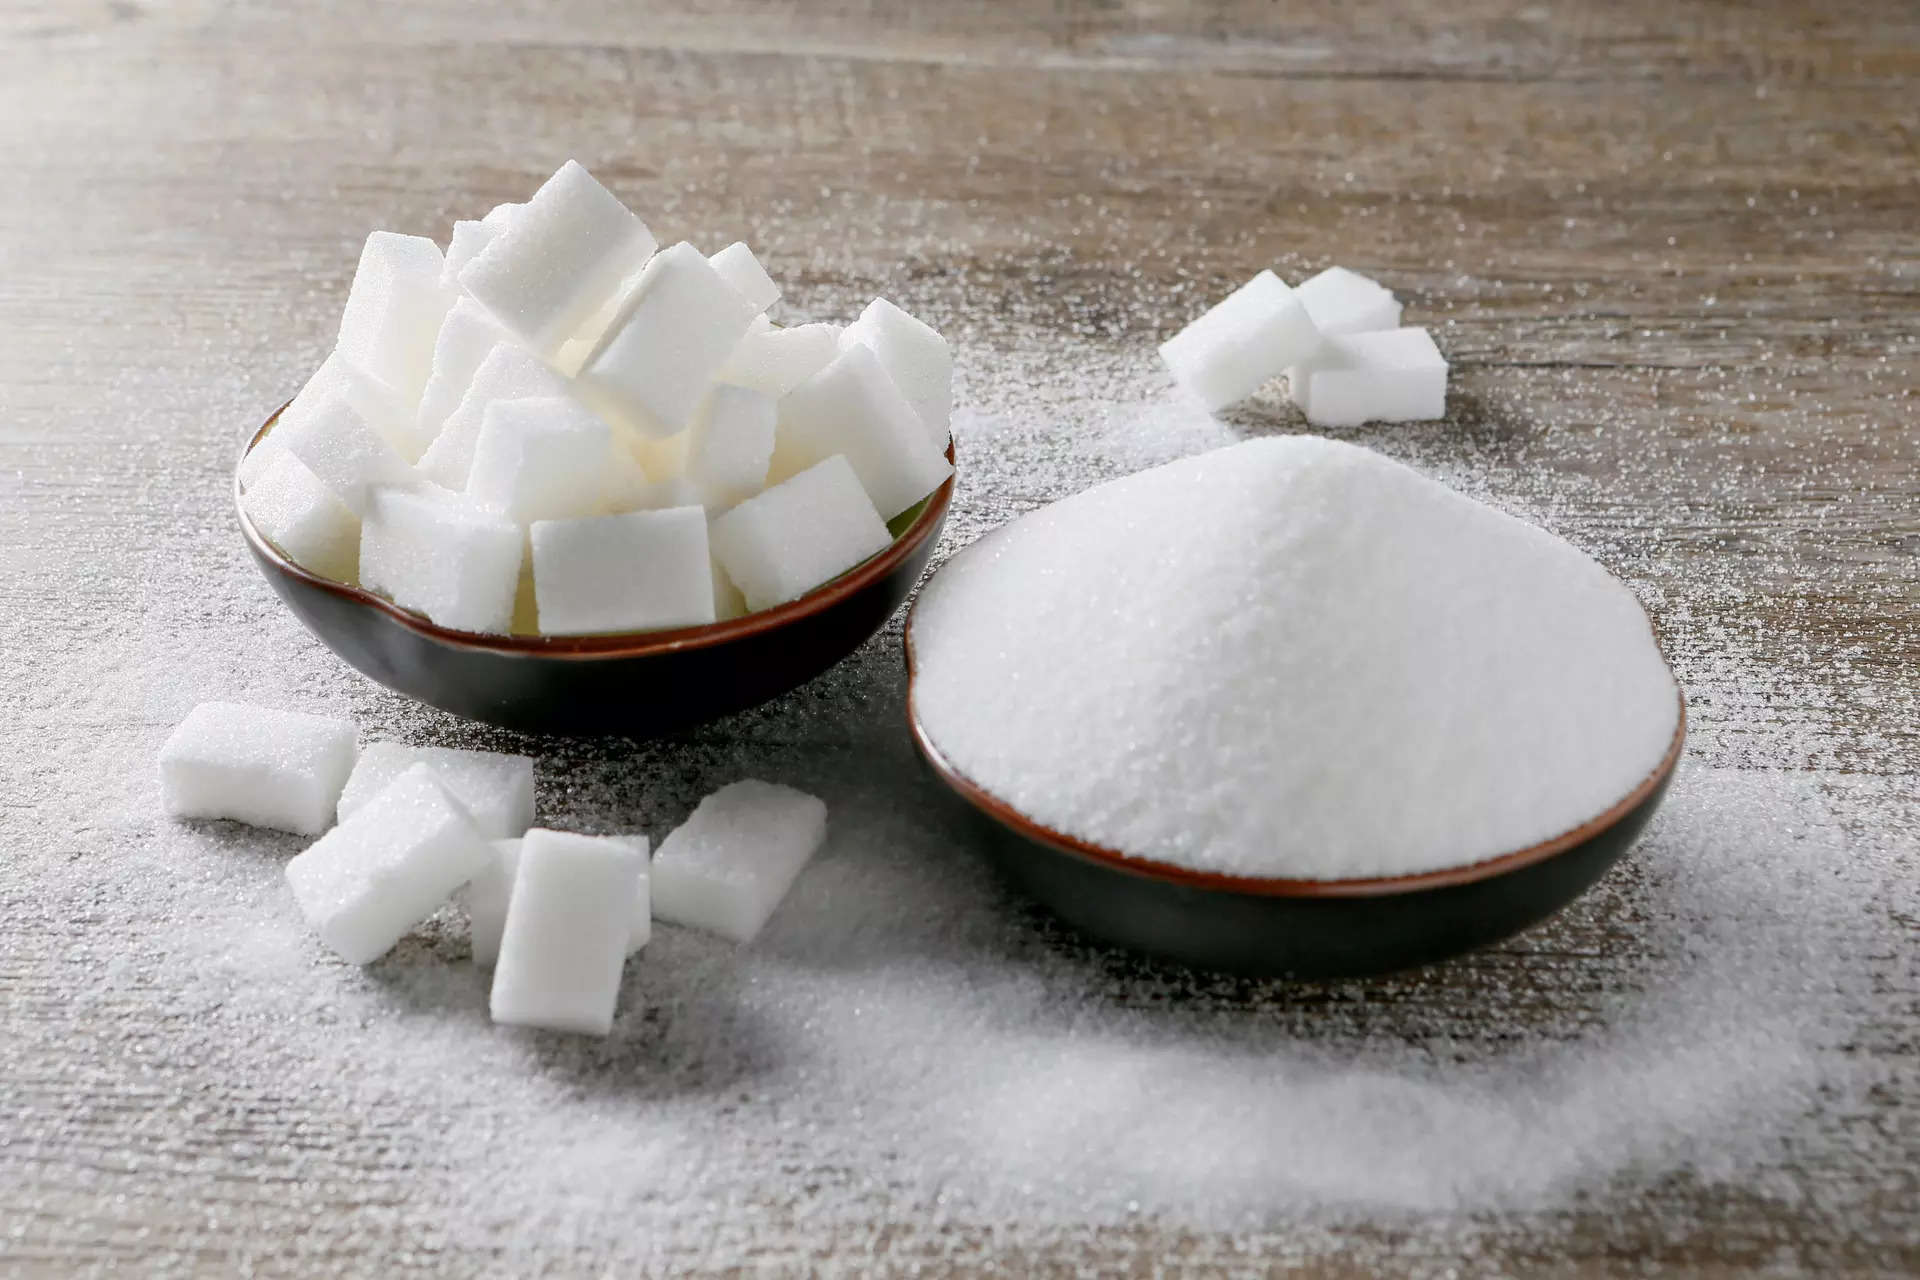 No hike in MSP causing problems for sugar industry: Federation official 